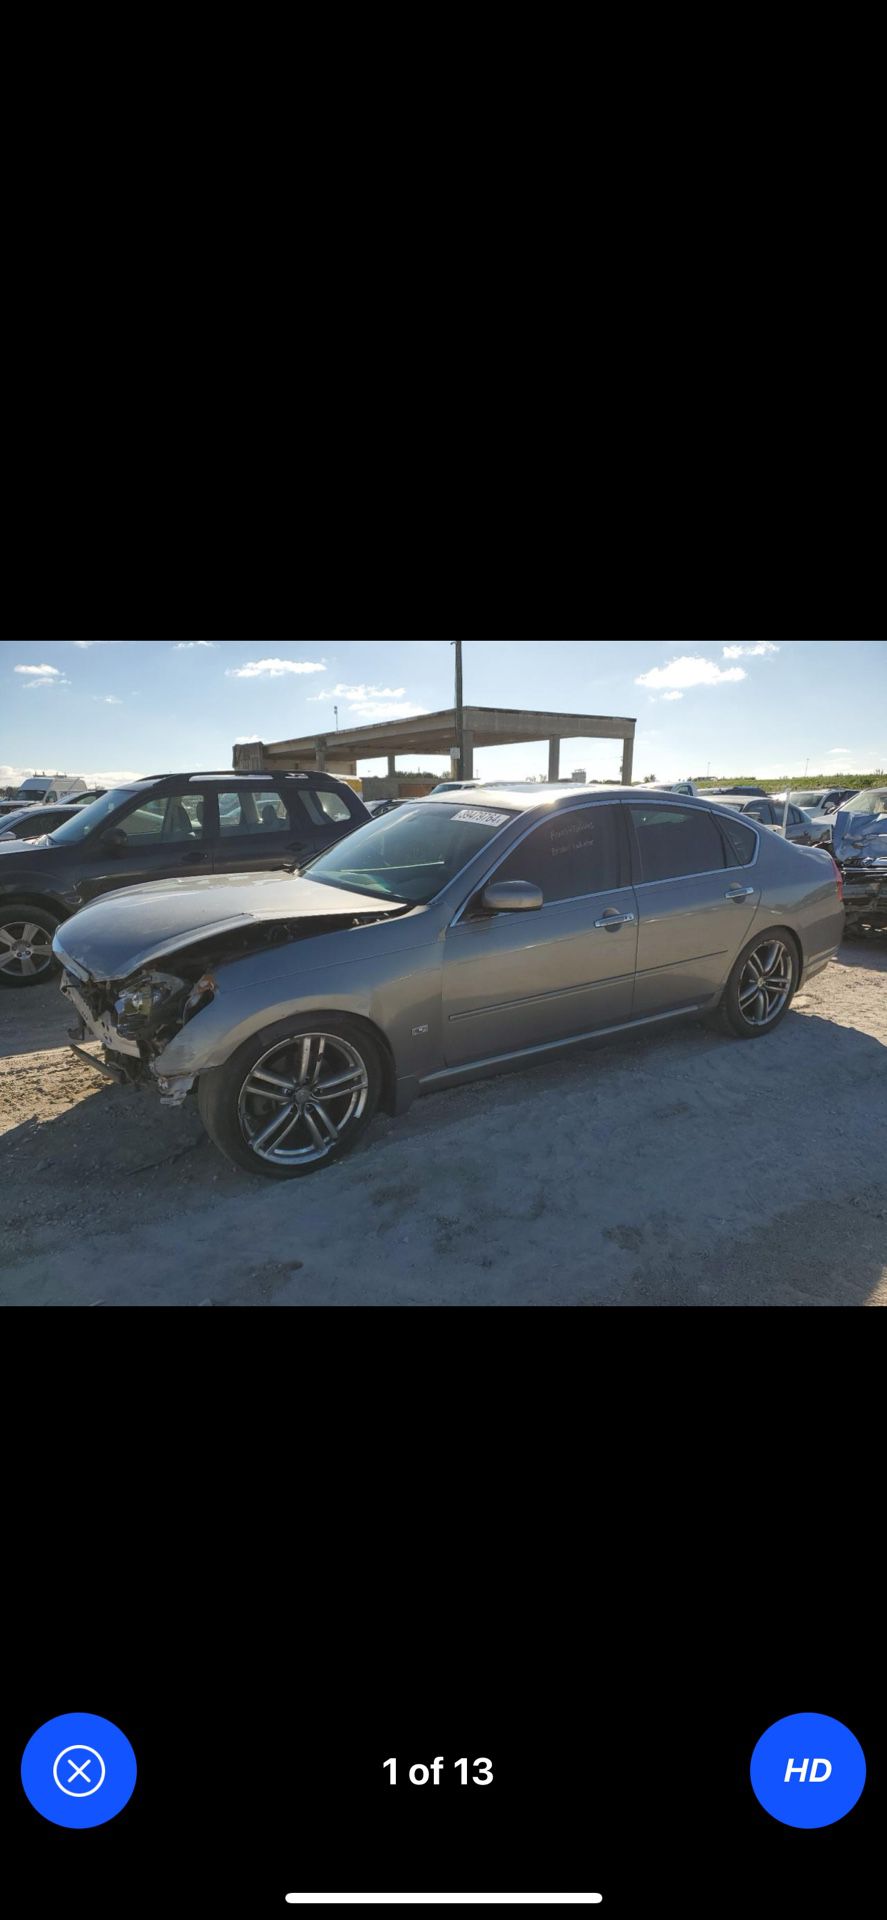 2007 Infinity M35 Sedan Crashed As Is For Parts Or Repair 